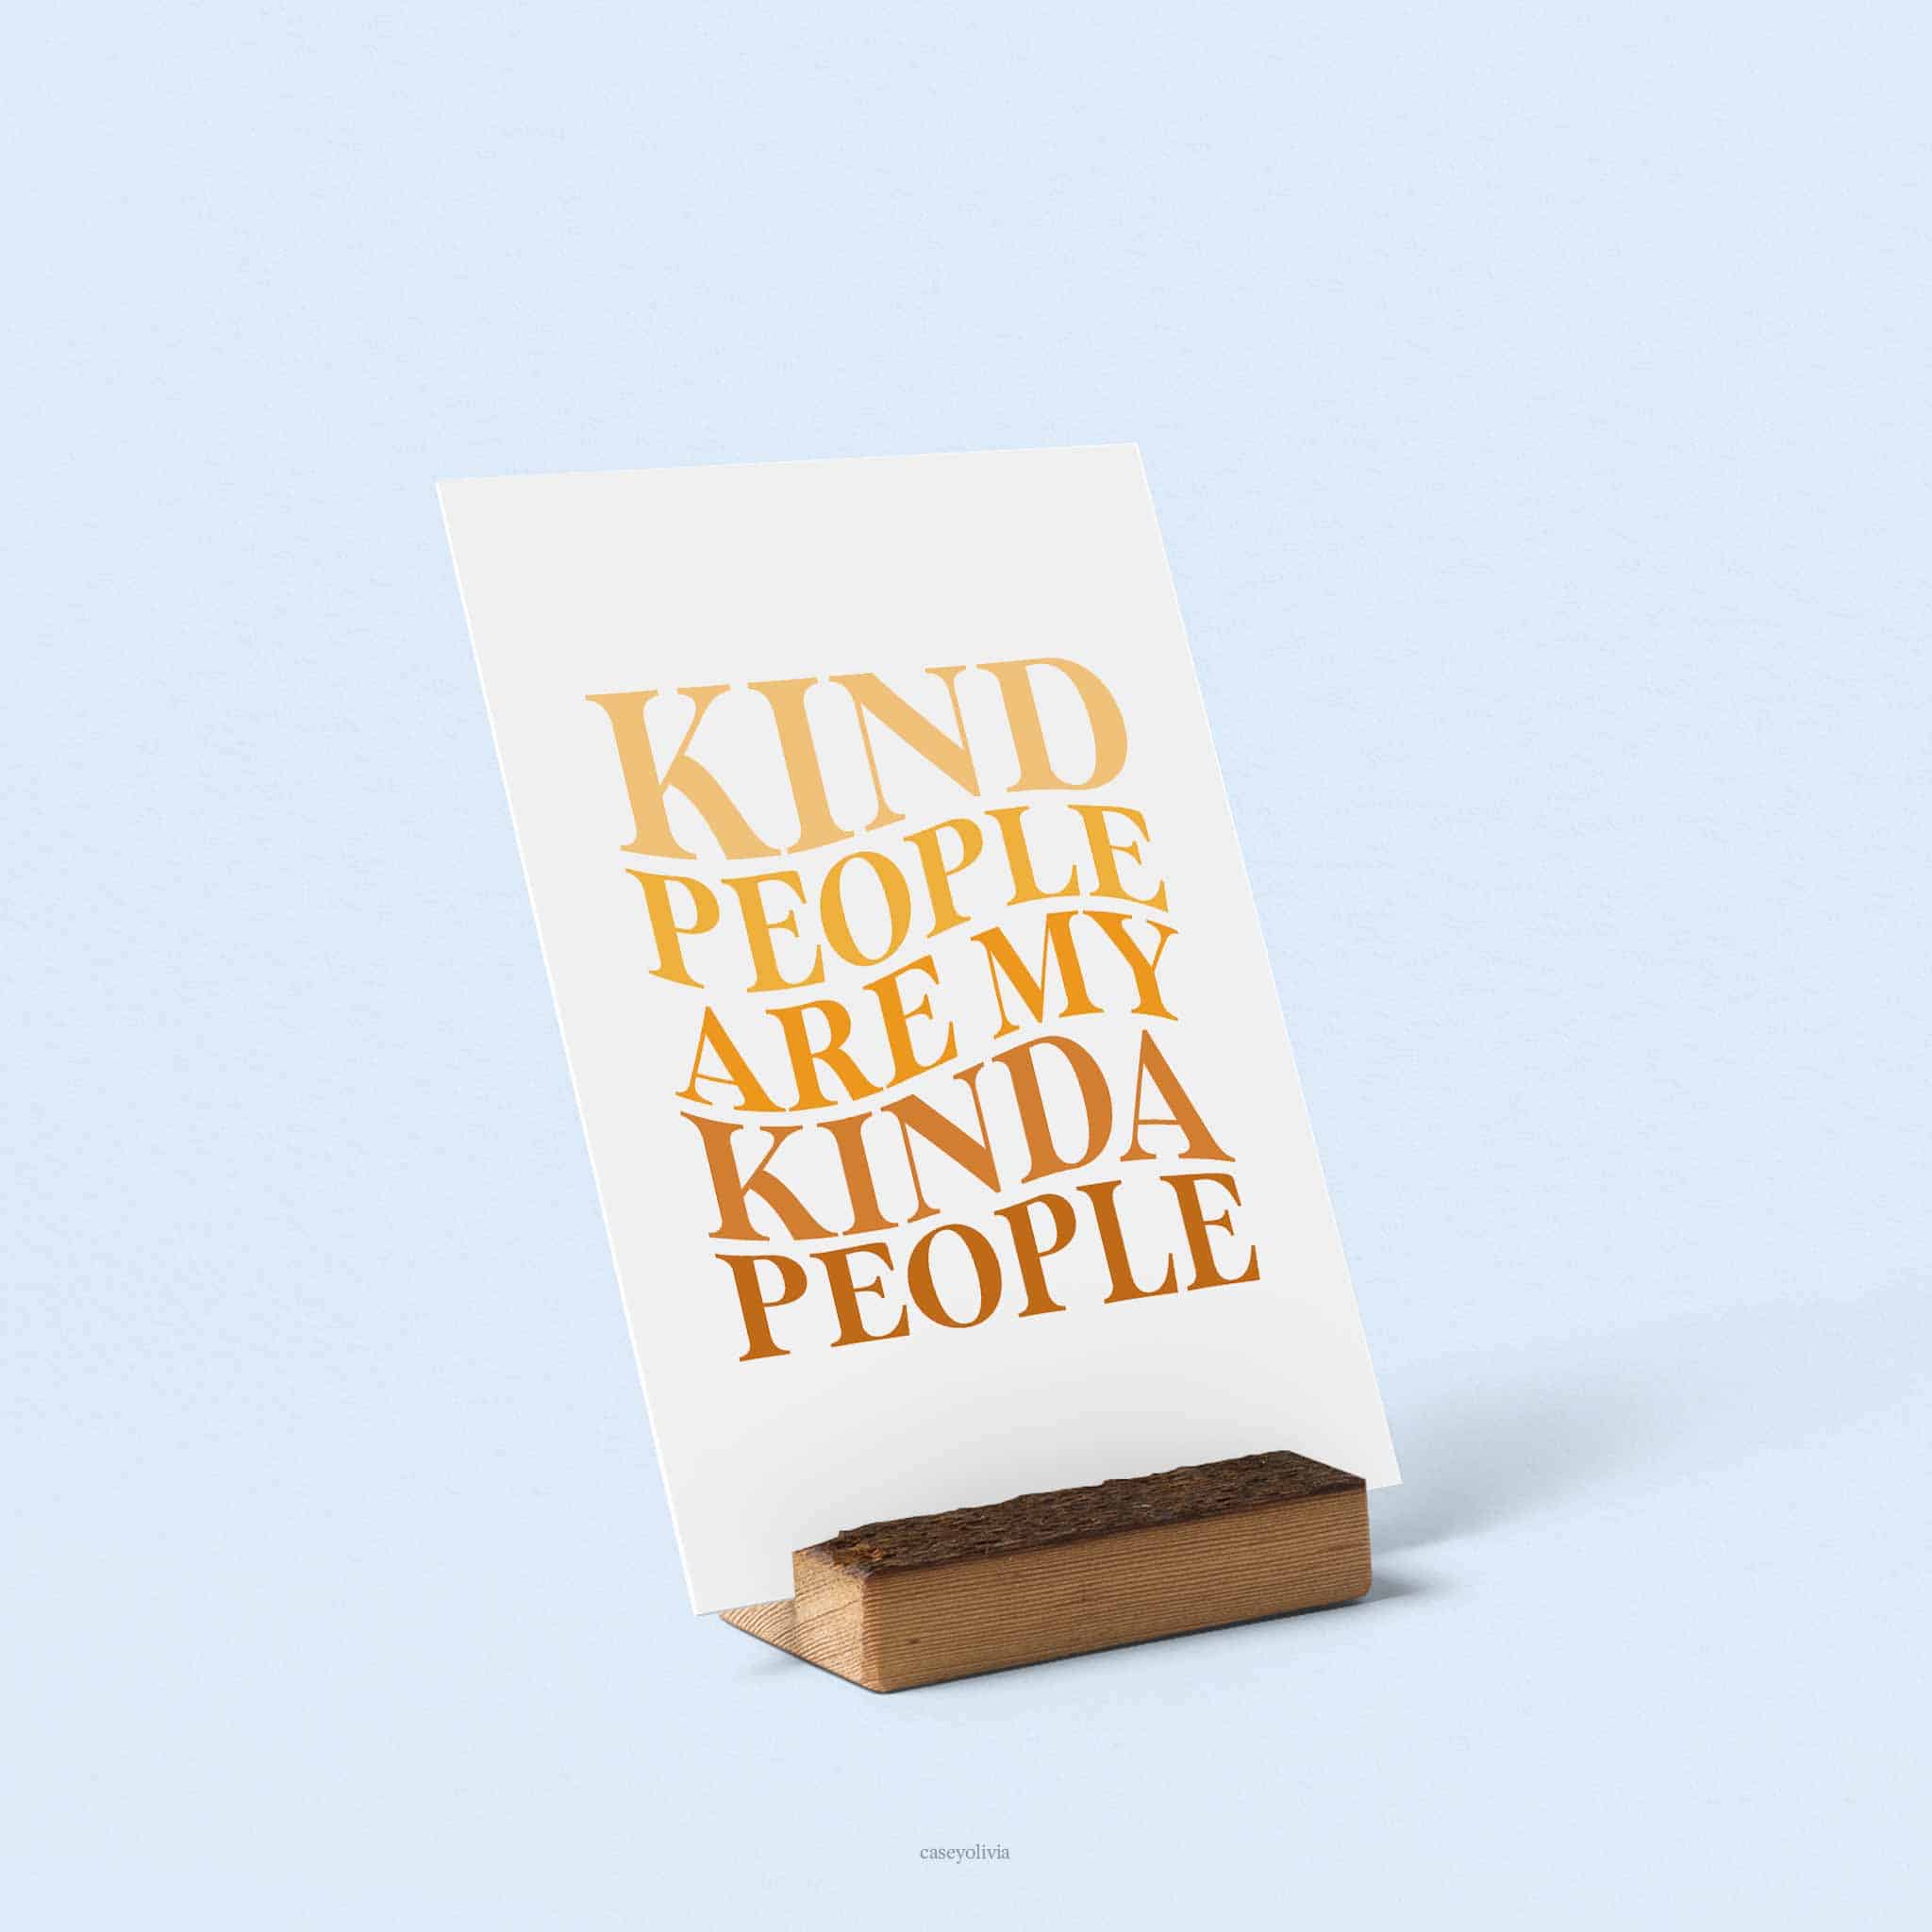 kind people inspiring quote to print for apartment or dorm